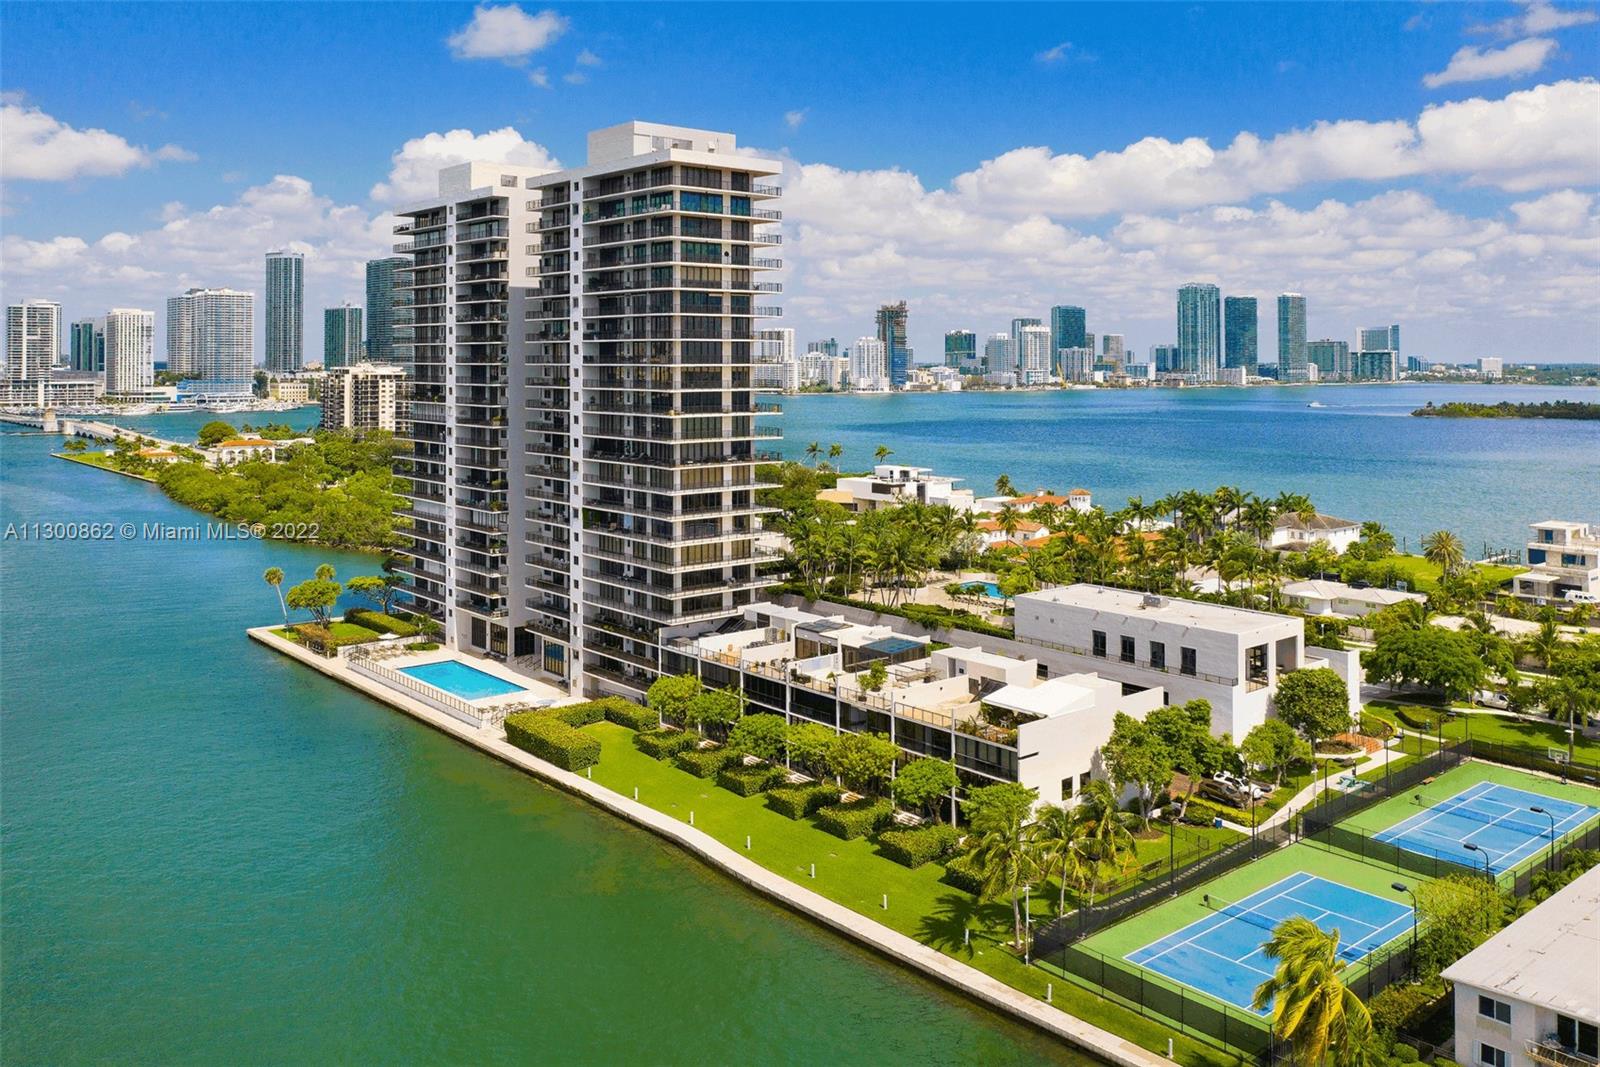 Located on the Venetian Islands, one of Miami Beach's most desired locations! Enjoy breathtaking views of Downtown, Miami Beach and Biscayne Bay from this beautiful and spacious 3 bedroom, 2.1 bath residence at 1000 Venetian. Sitting on the bay between Miami Beach and Downtown, this elegant residence features floor to ceiling windows, an oversized  terrace with views from every room. This full service luxury building offers two pools, jacuzzi, fitness center, spa, 2 tennis courts, basketball court, children's play area, dog park, gated entry, doorman, and security. 1 assigned covered parking space. Come and preview this beautiful building on the Venetian!